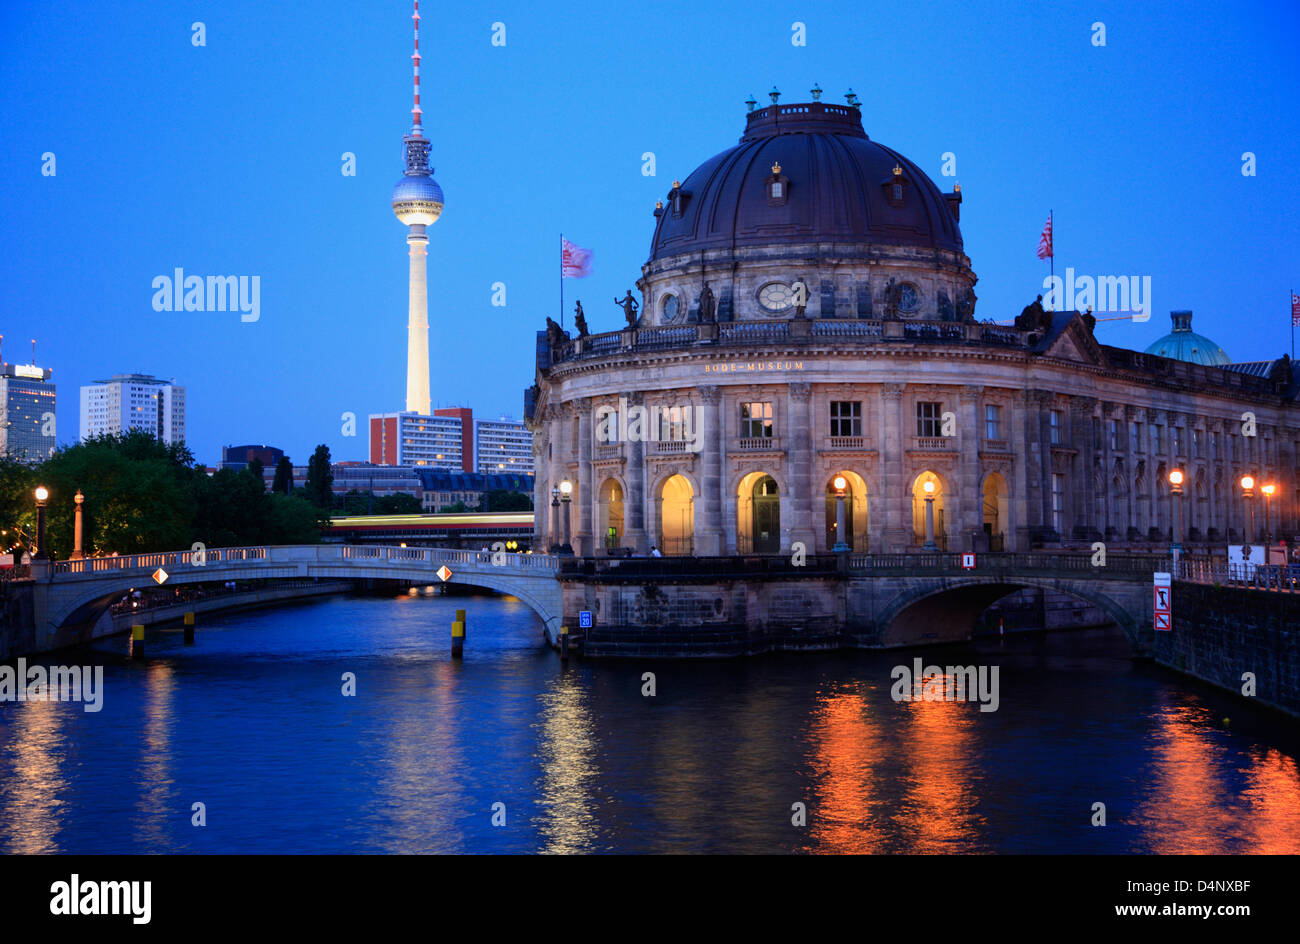 View to Bode museum at museum island at night, Berlin, Germany Stock Photo